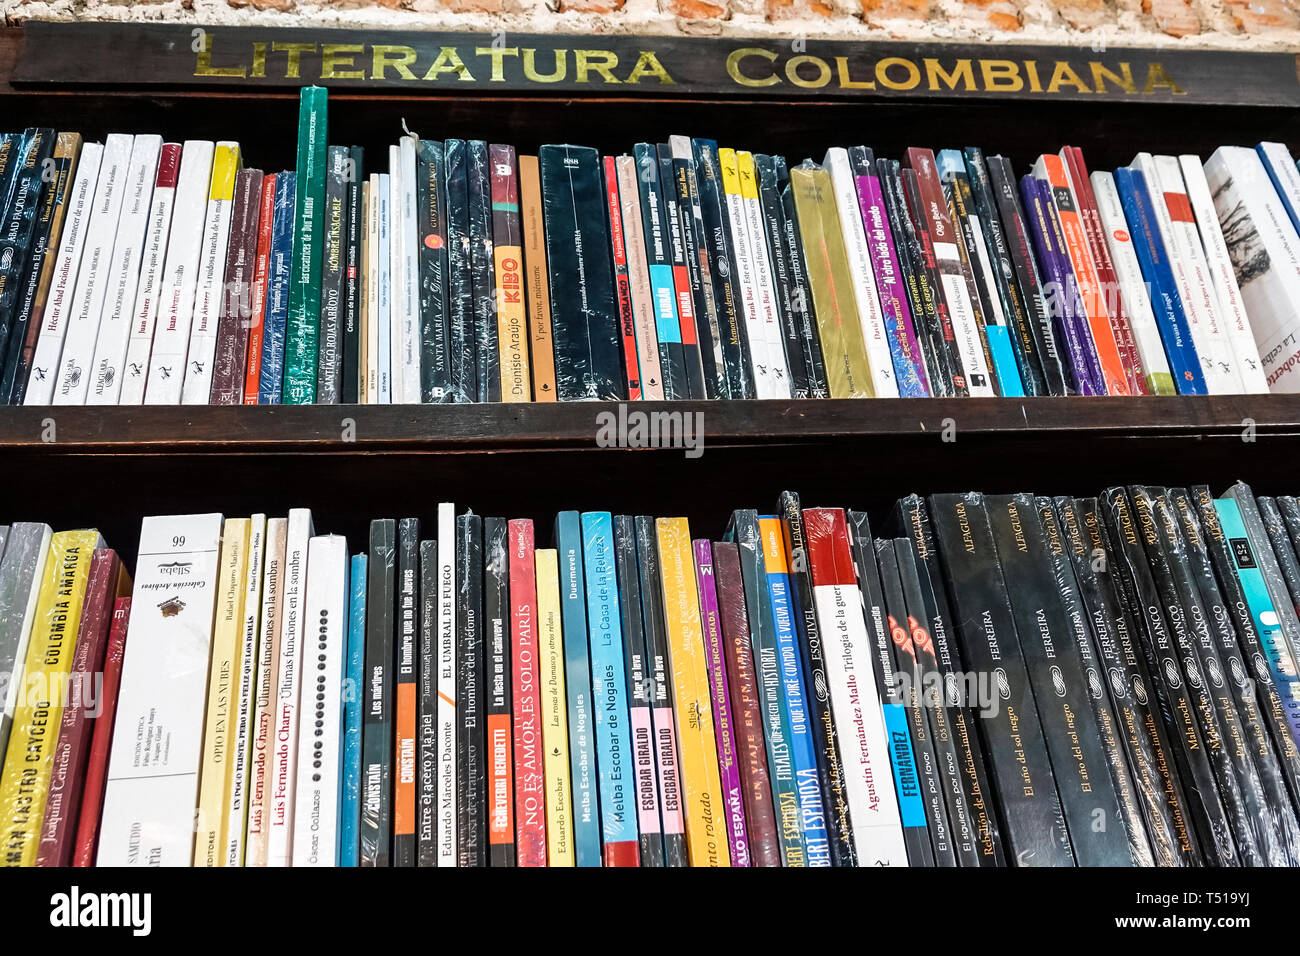 Cartagena Colombia,Abaco Libros y Cafe,Abacus bookstore cafe,interior inside,bookshelf,Colombian literature,books,visitors travel traveling tour touri Stock Photo